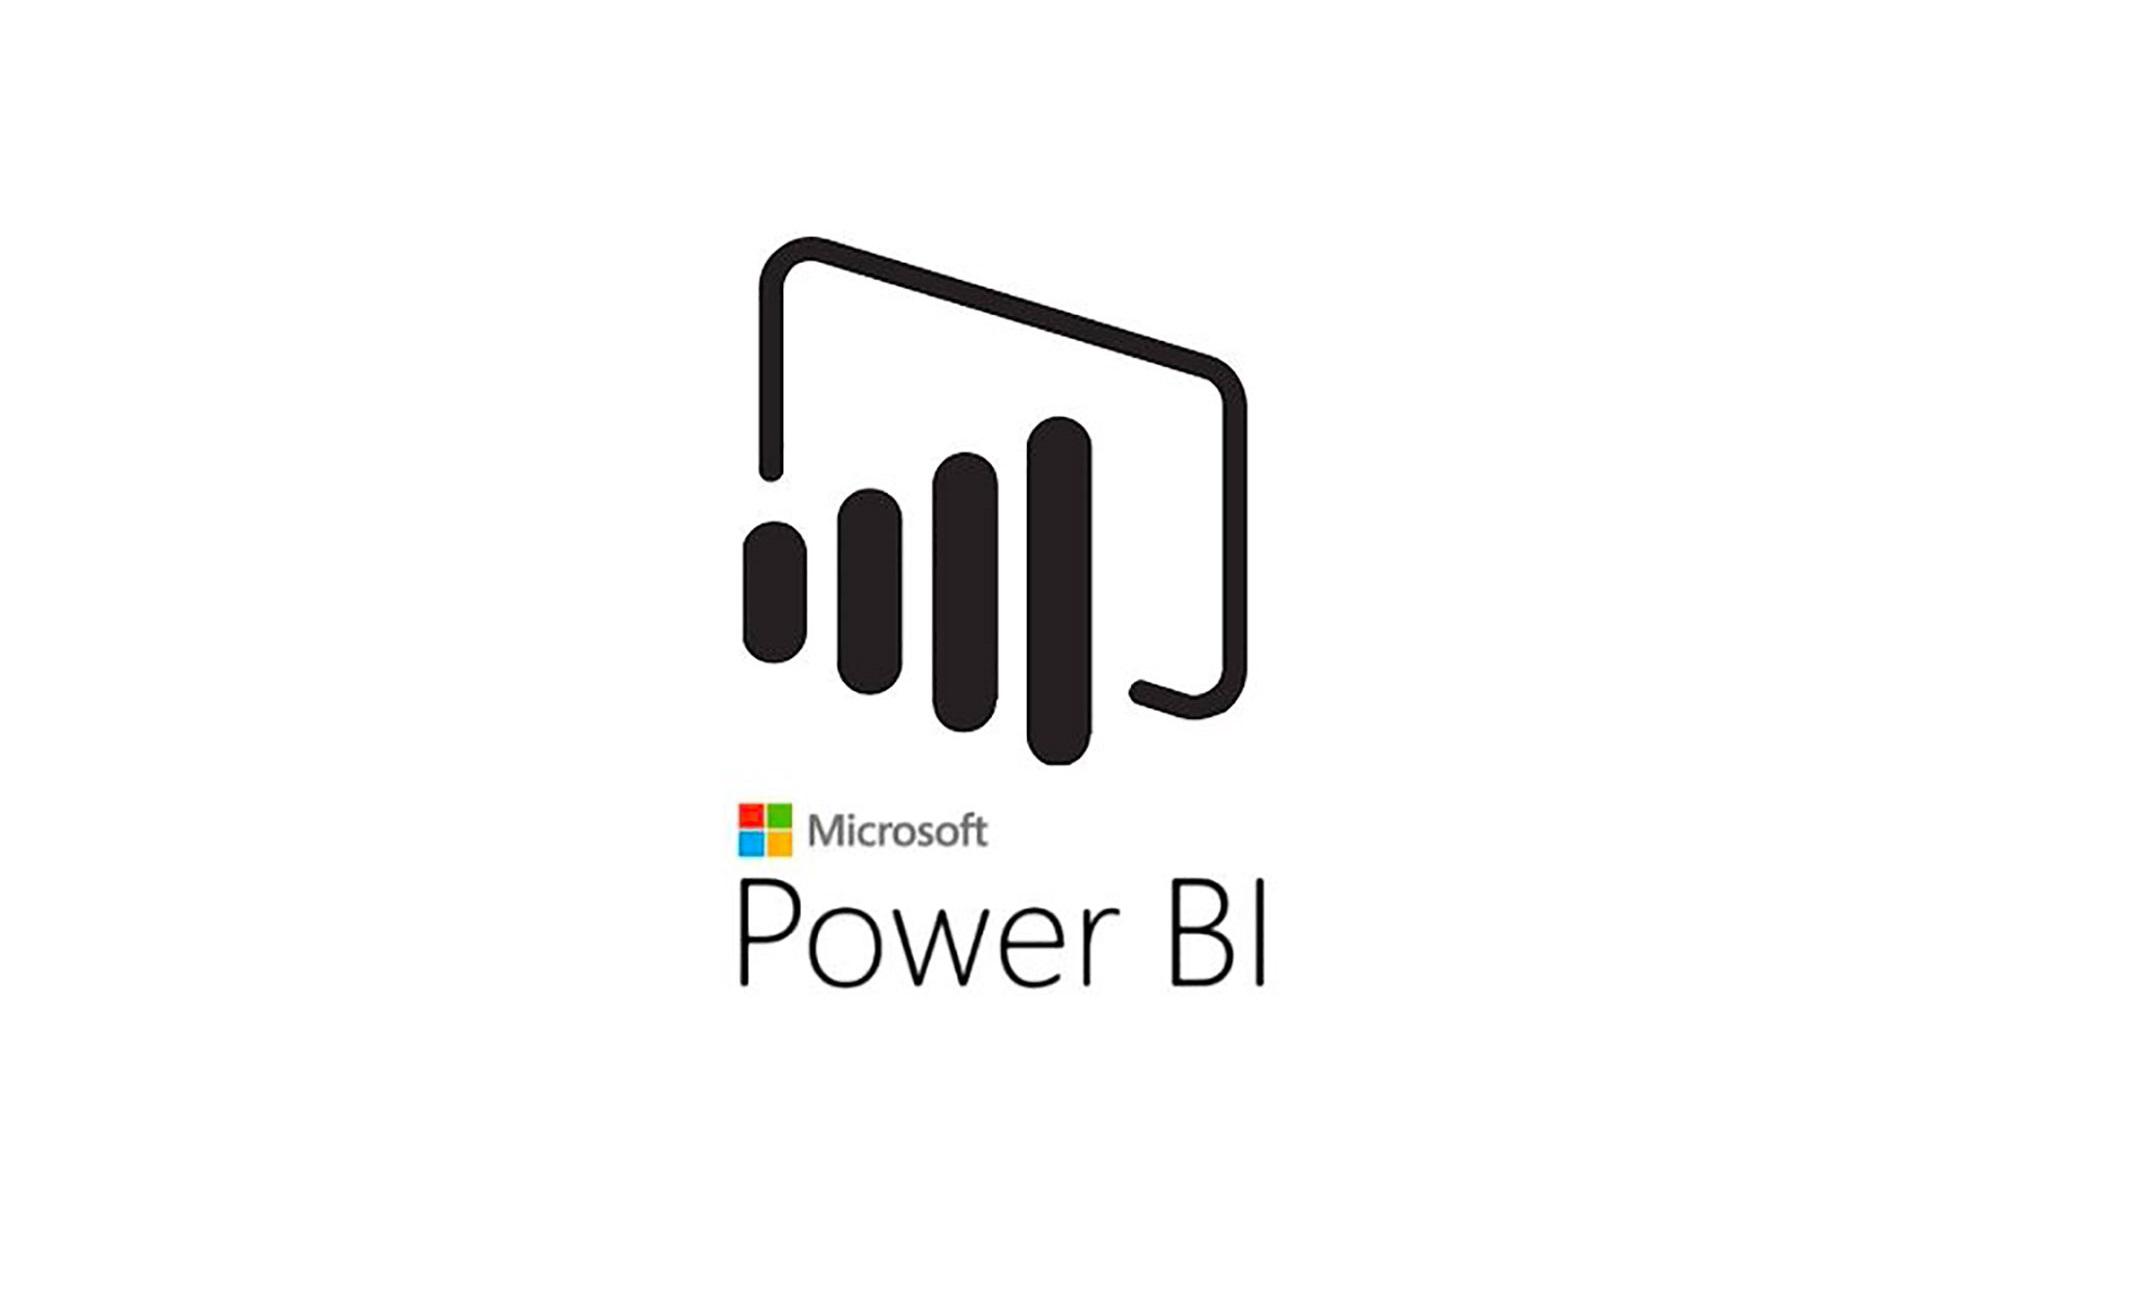 Microsoft Power BI Training in Long Island | Introduction to Power BI training for beginners | Getting started with Power BI | What is Power BI | January 20, 2020 - February 12, 2020